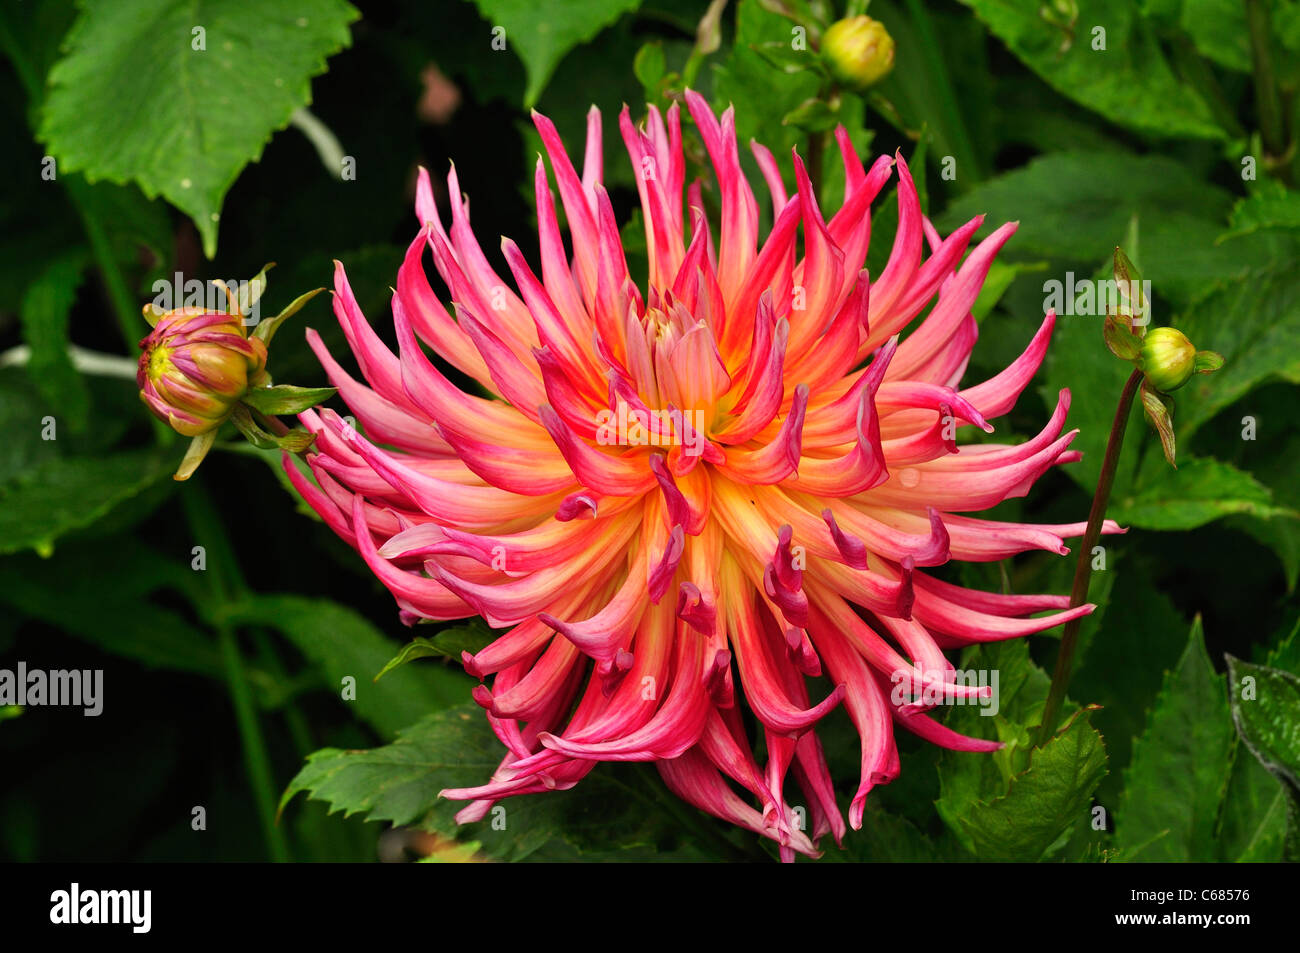 A perfect flower head of a pink dahlia in an English garden UK Stock Photo